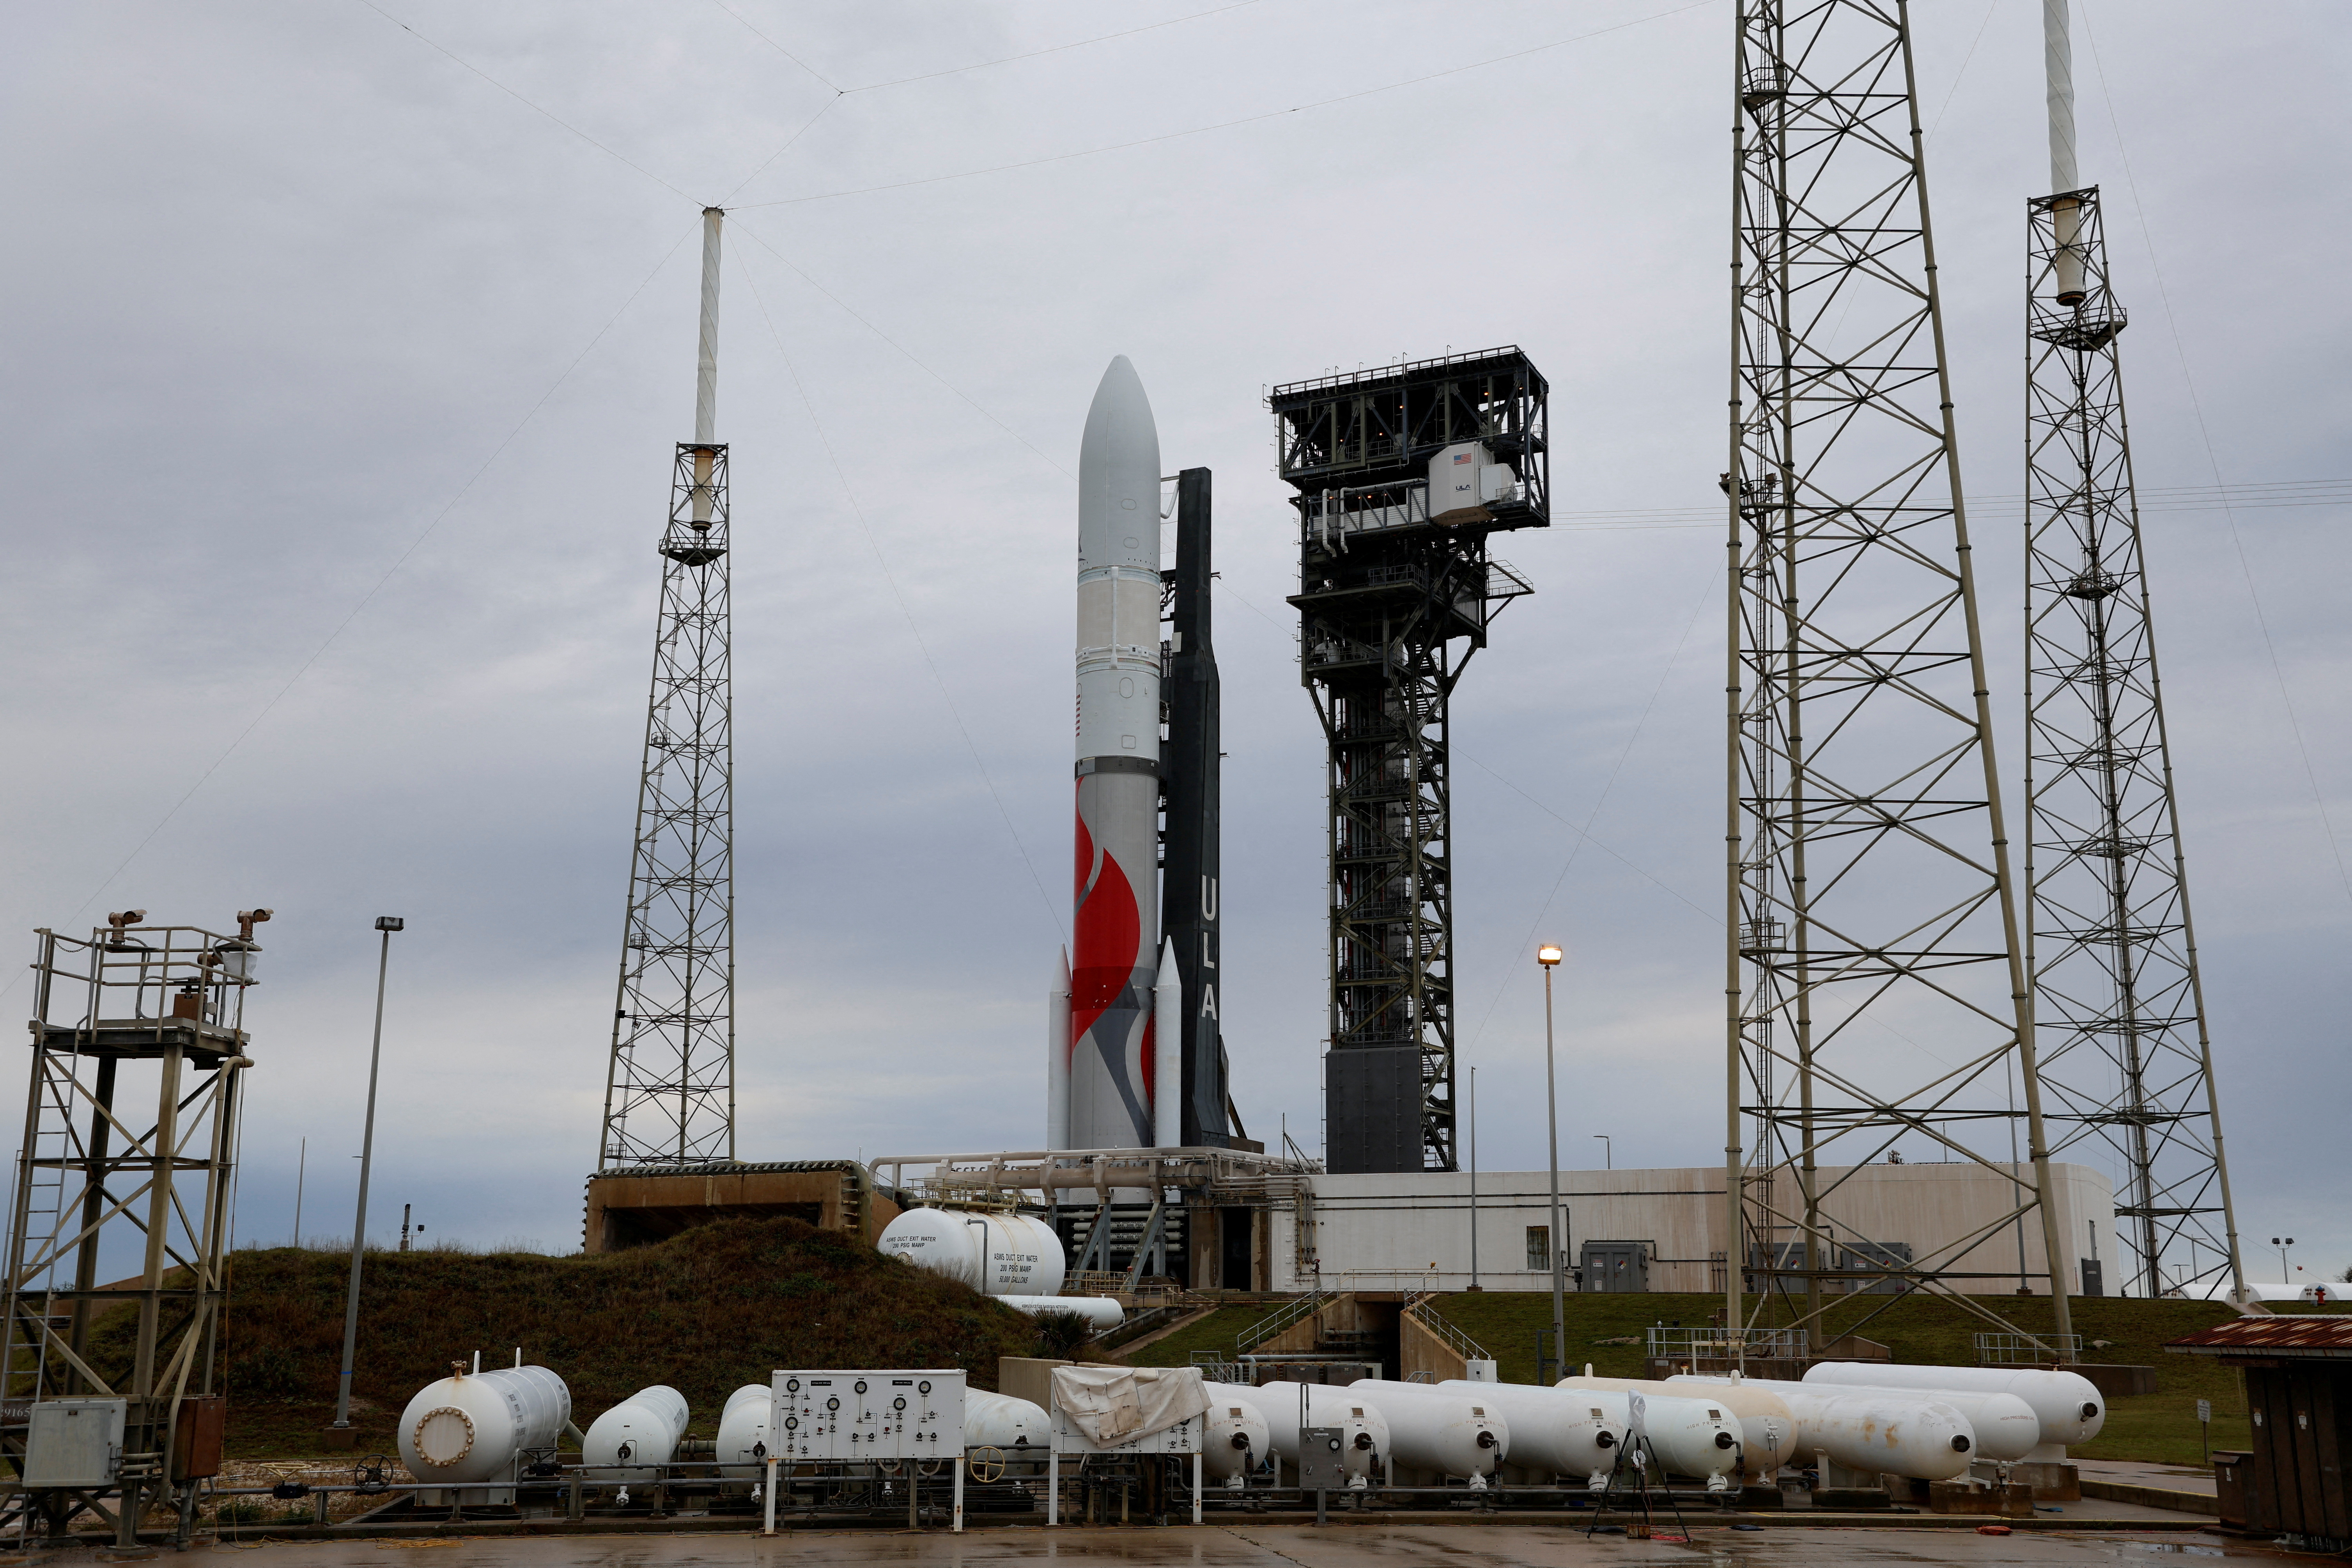 Boeing-Lockheed joint venture United Launch Alliance’s next-generation Vulcan rocket stands ready for launch on its debut flight from Cape Canaveral